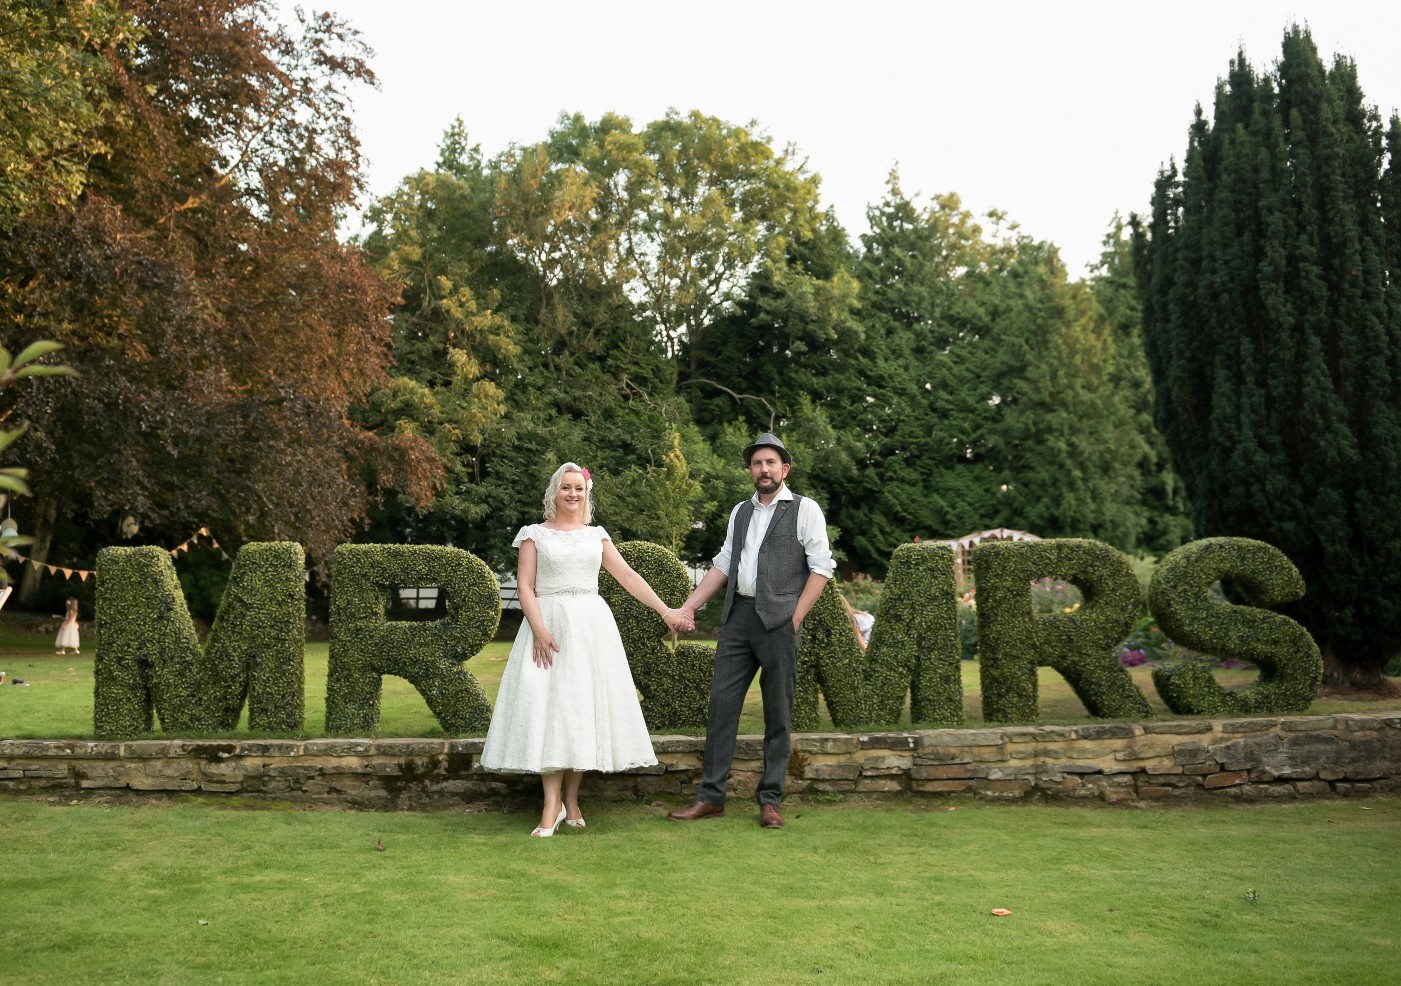 Wedding photography - rustic themed wedding at Hayne House in Saltwood, Kent - bride and groom